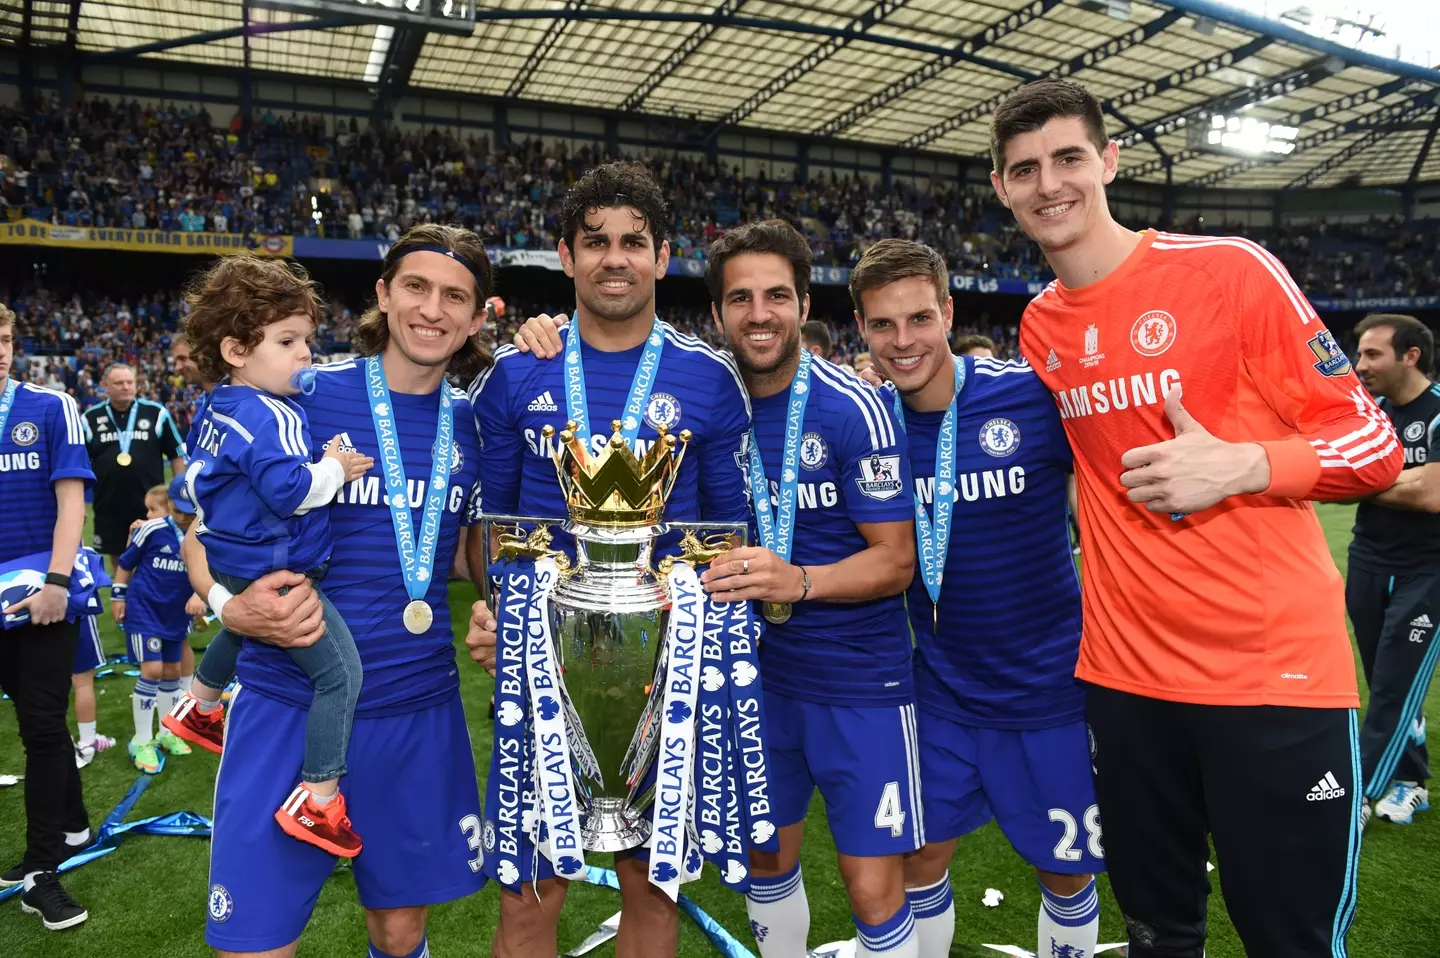 Cesc Fabregas and Thibaut Courtois, among others, celebrate winning the Premier League title with Chelsea. Image: Getty